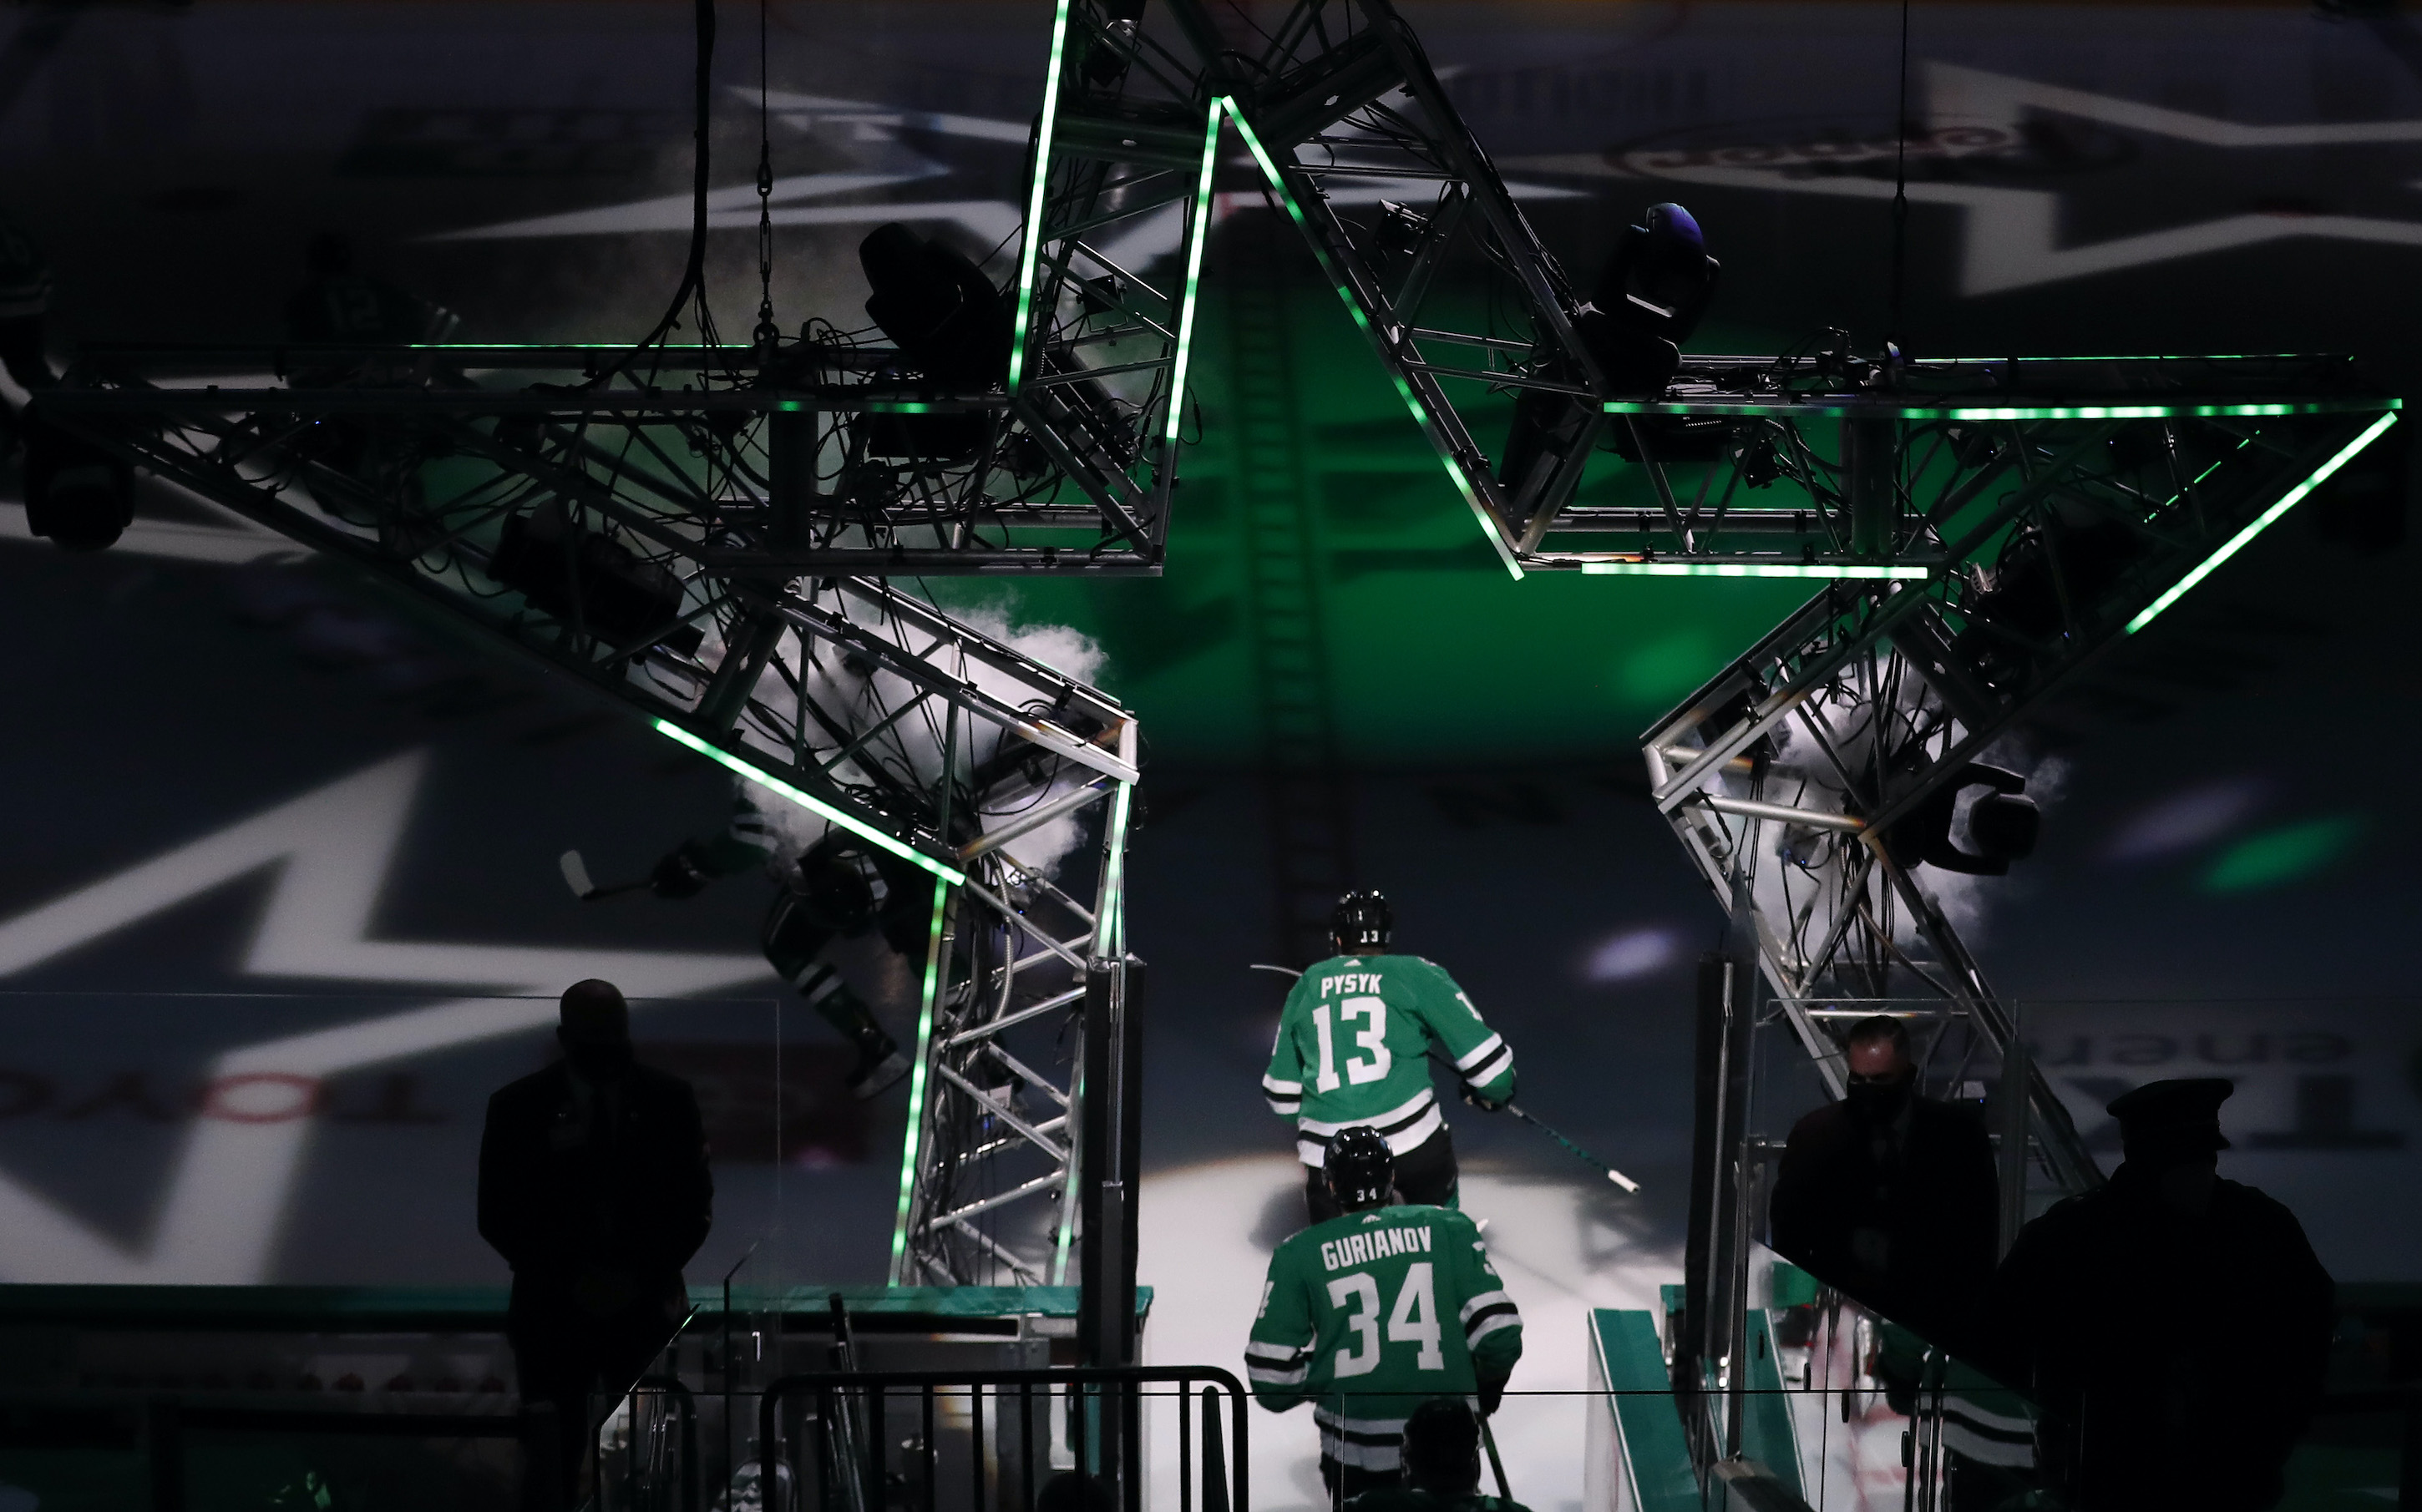 Mark Pysyk #13 of the Dallas Stars and Denis Gurianov #34 of the Dallas Stars take the ice against the Chicago Blackhawks at American Airlines Center on February 09, 2021 in Dallas, Texas.